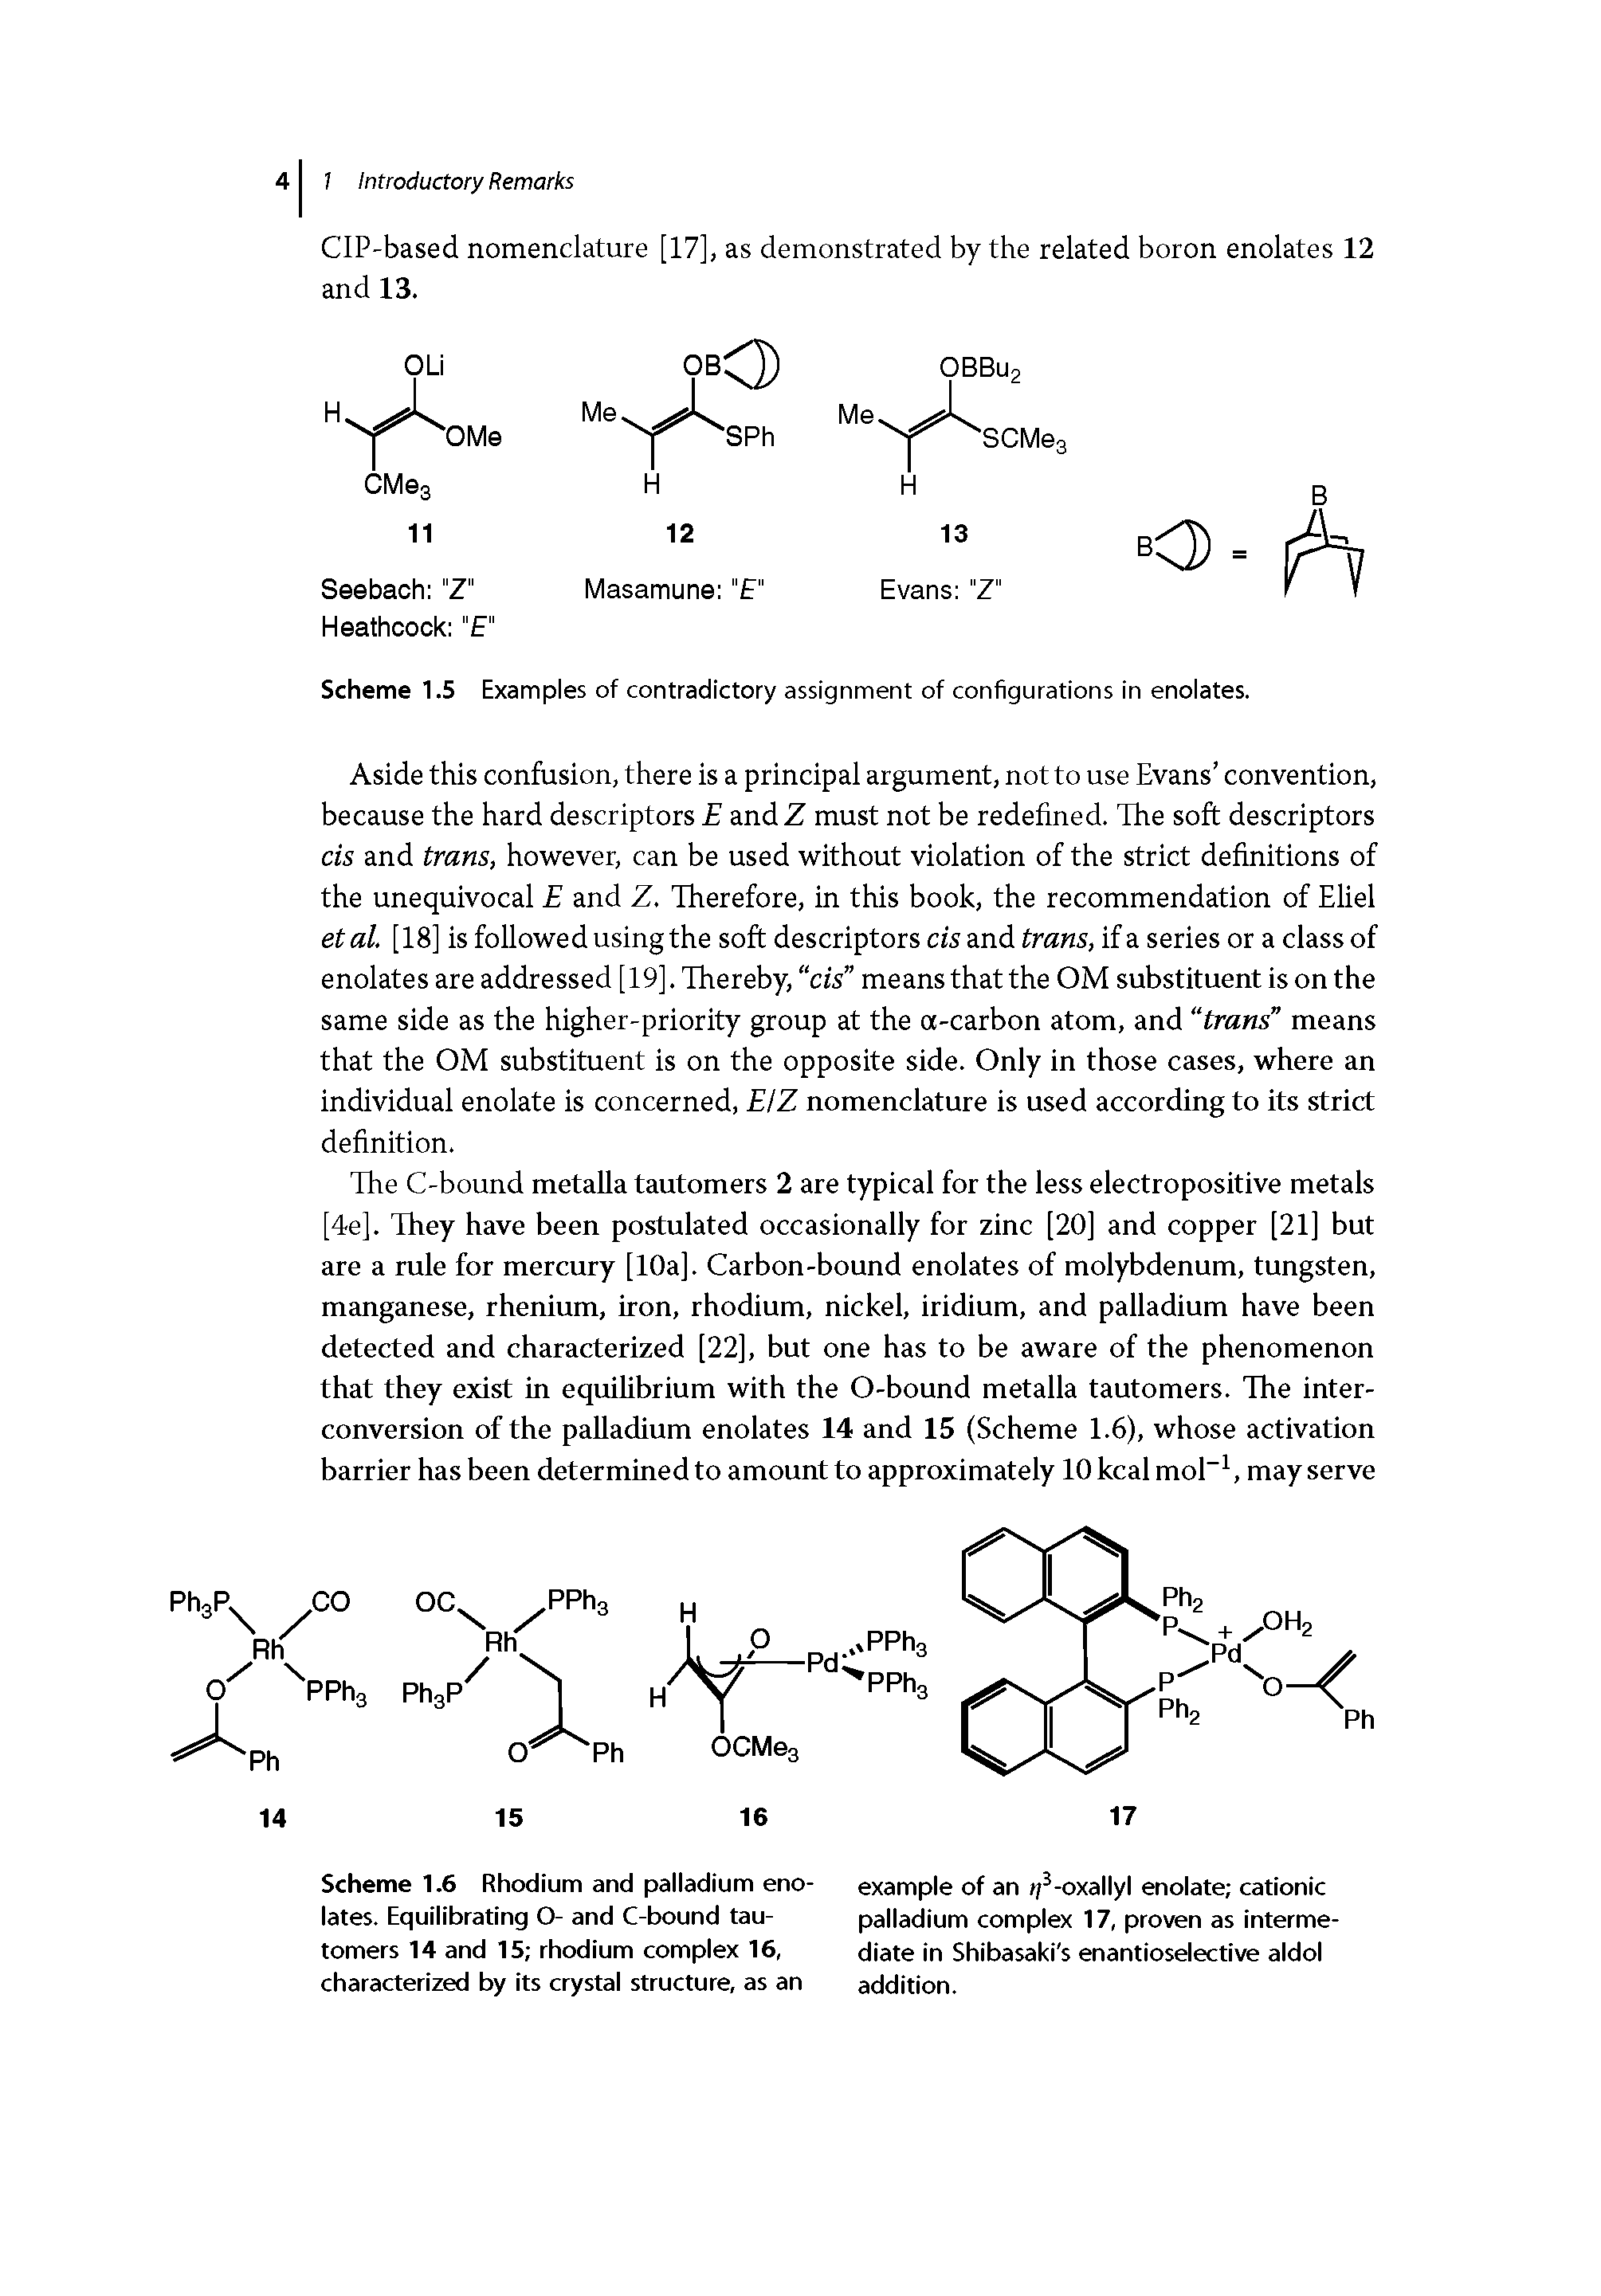 Scheme 1.6 Rhodium and palladium enolates. Equilibrating O- and C-bound tautomers 14 and 15 rhodium complex 16, characterized by its crystal structure, as an...